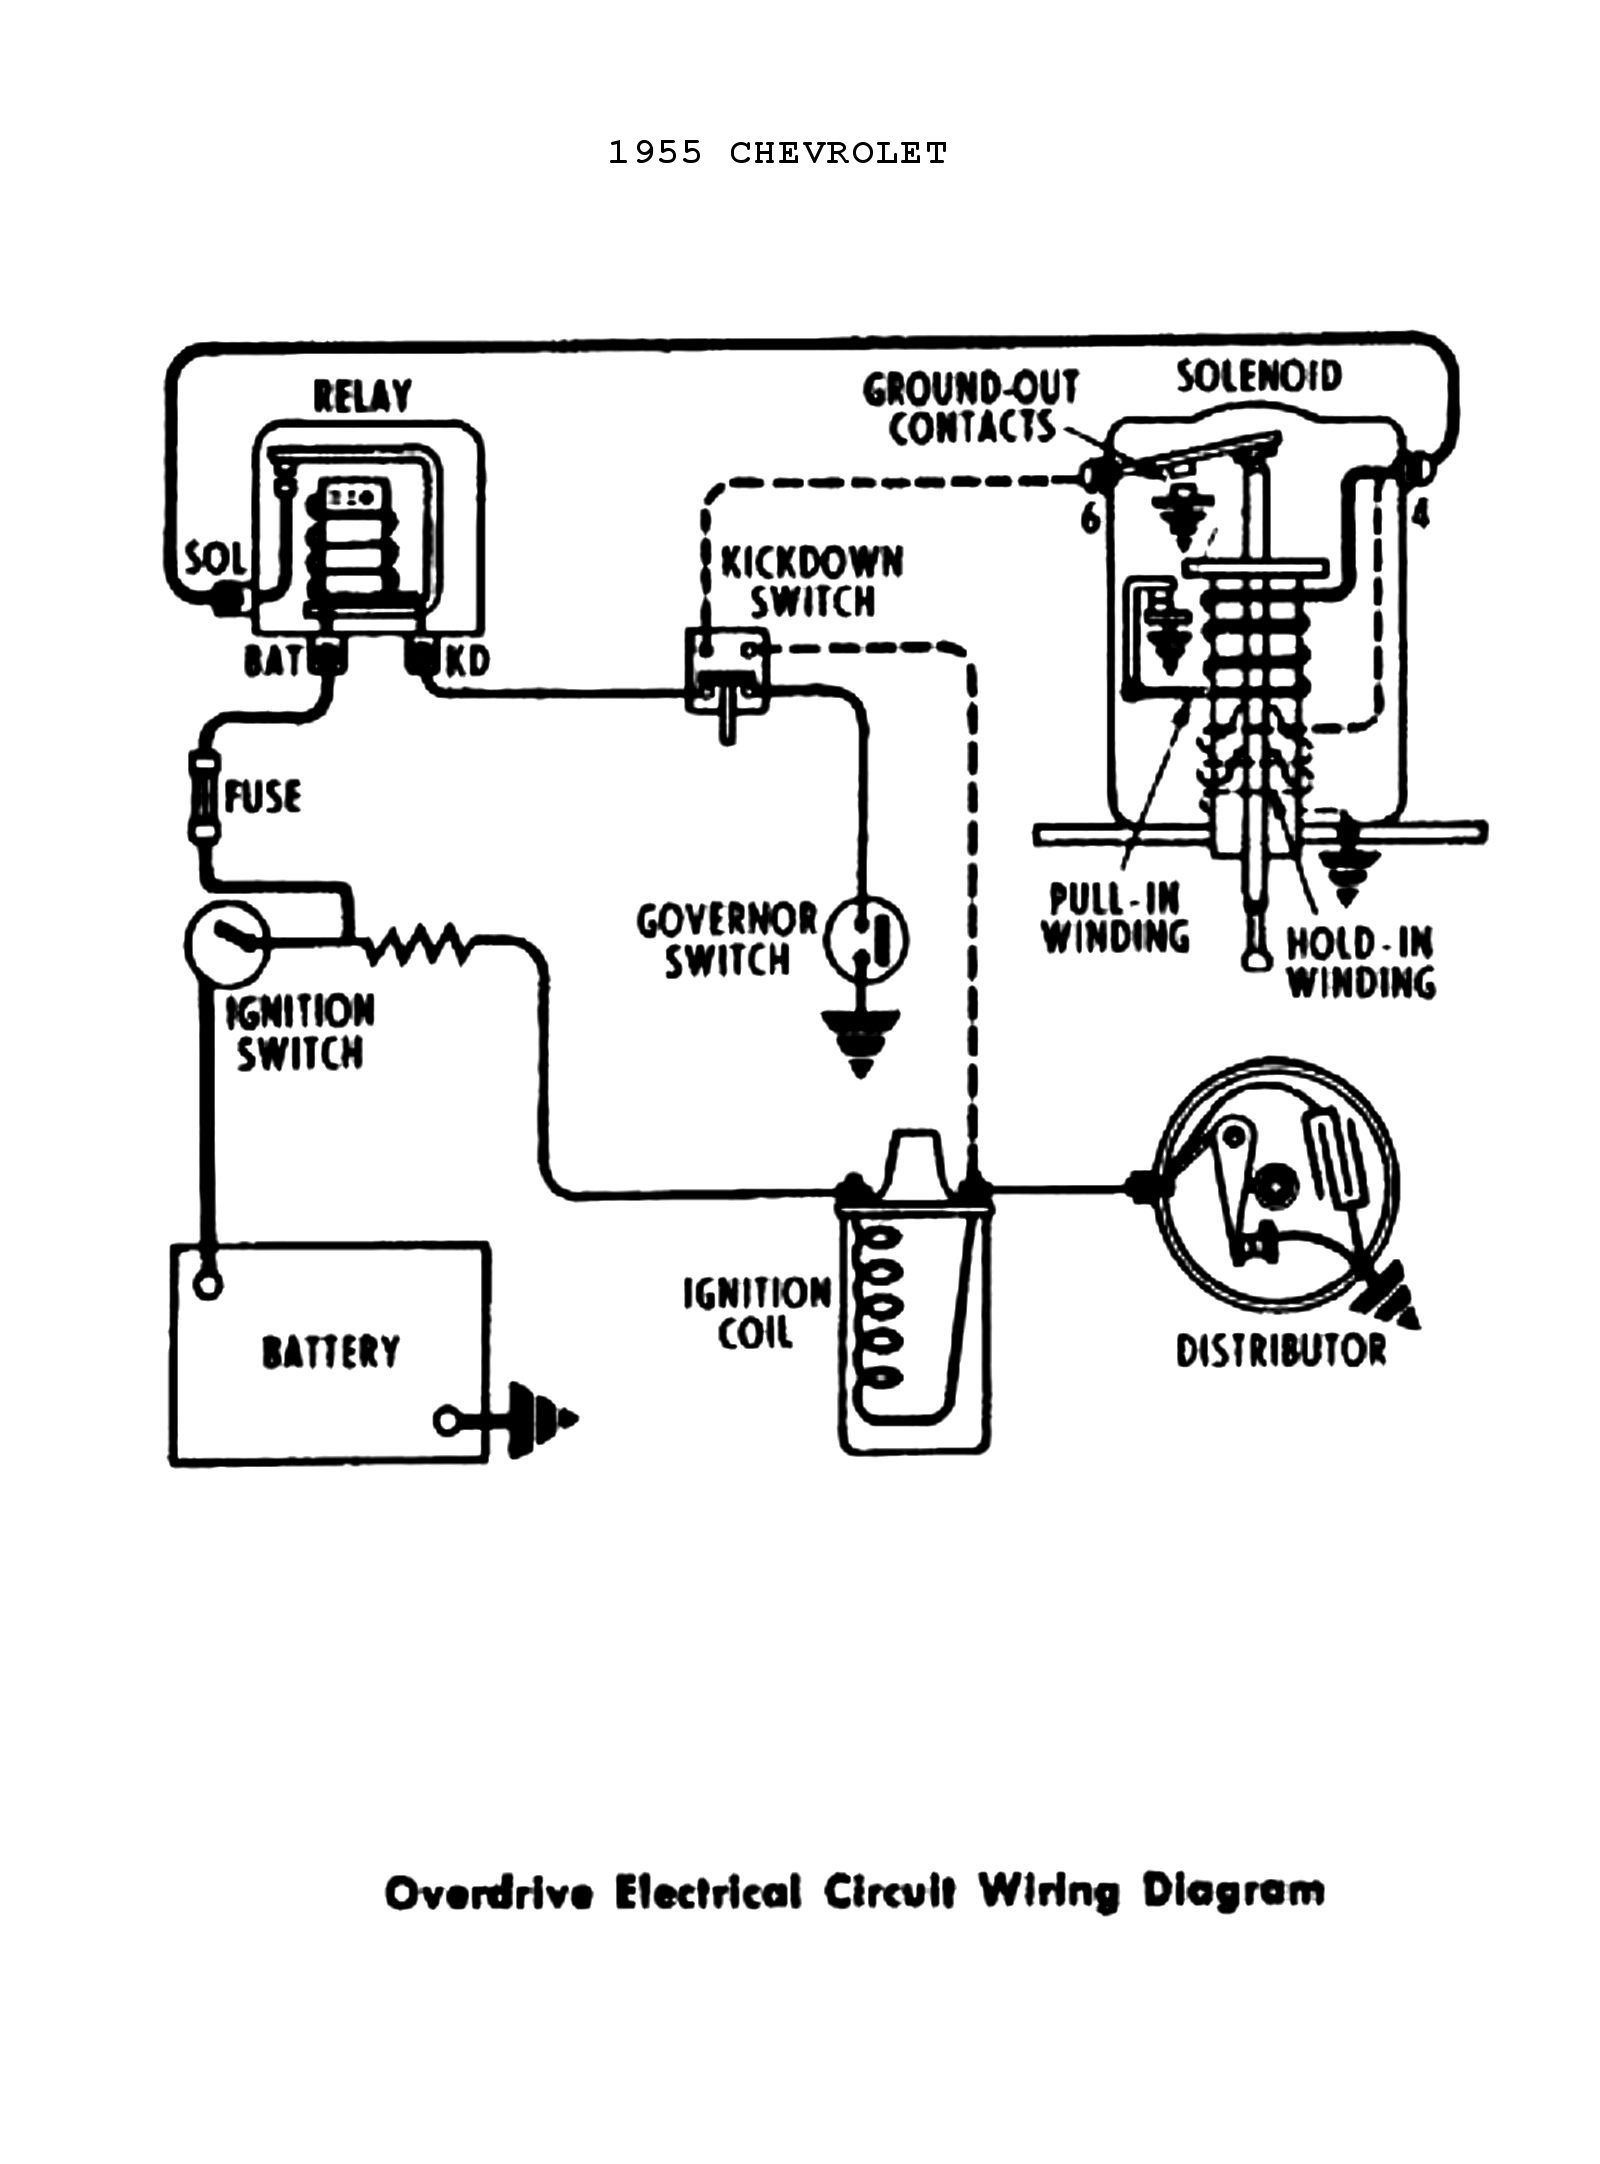 Ford Mercury Coil Wiring | Wiring Library - Hei Conversion Wiring Diagram